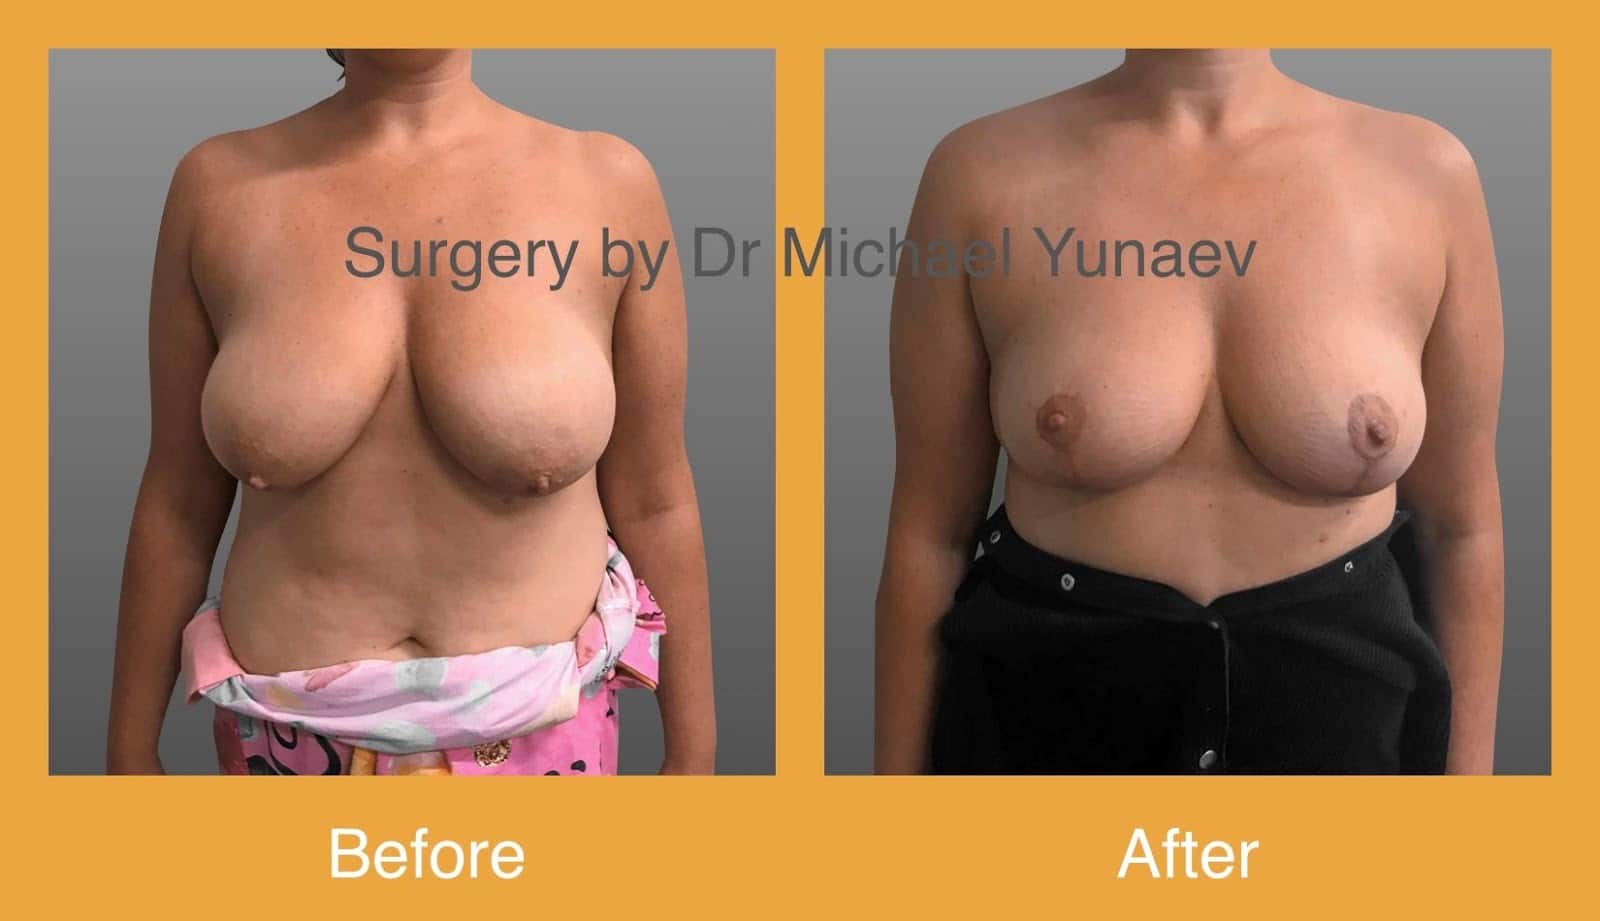 Understanding When You Need A Breast Lift Mastopexy, Not Just A Breast Augmentation Mammoplasty | 2